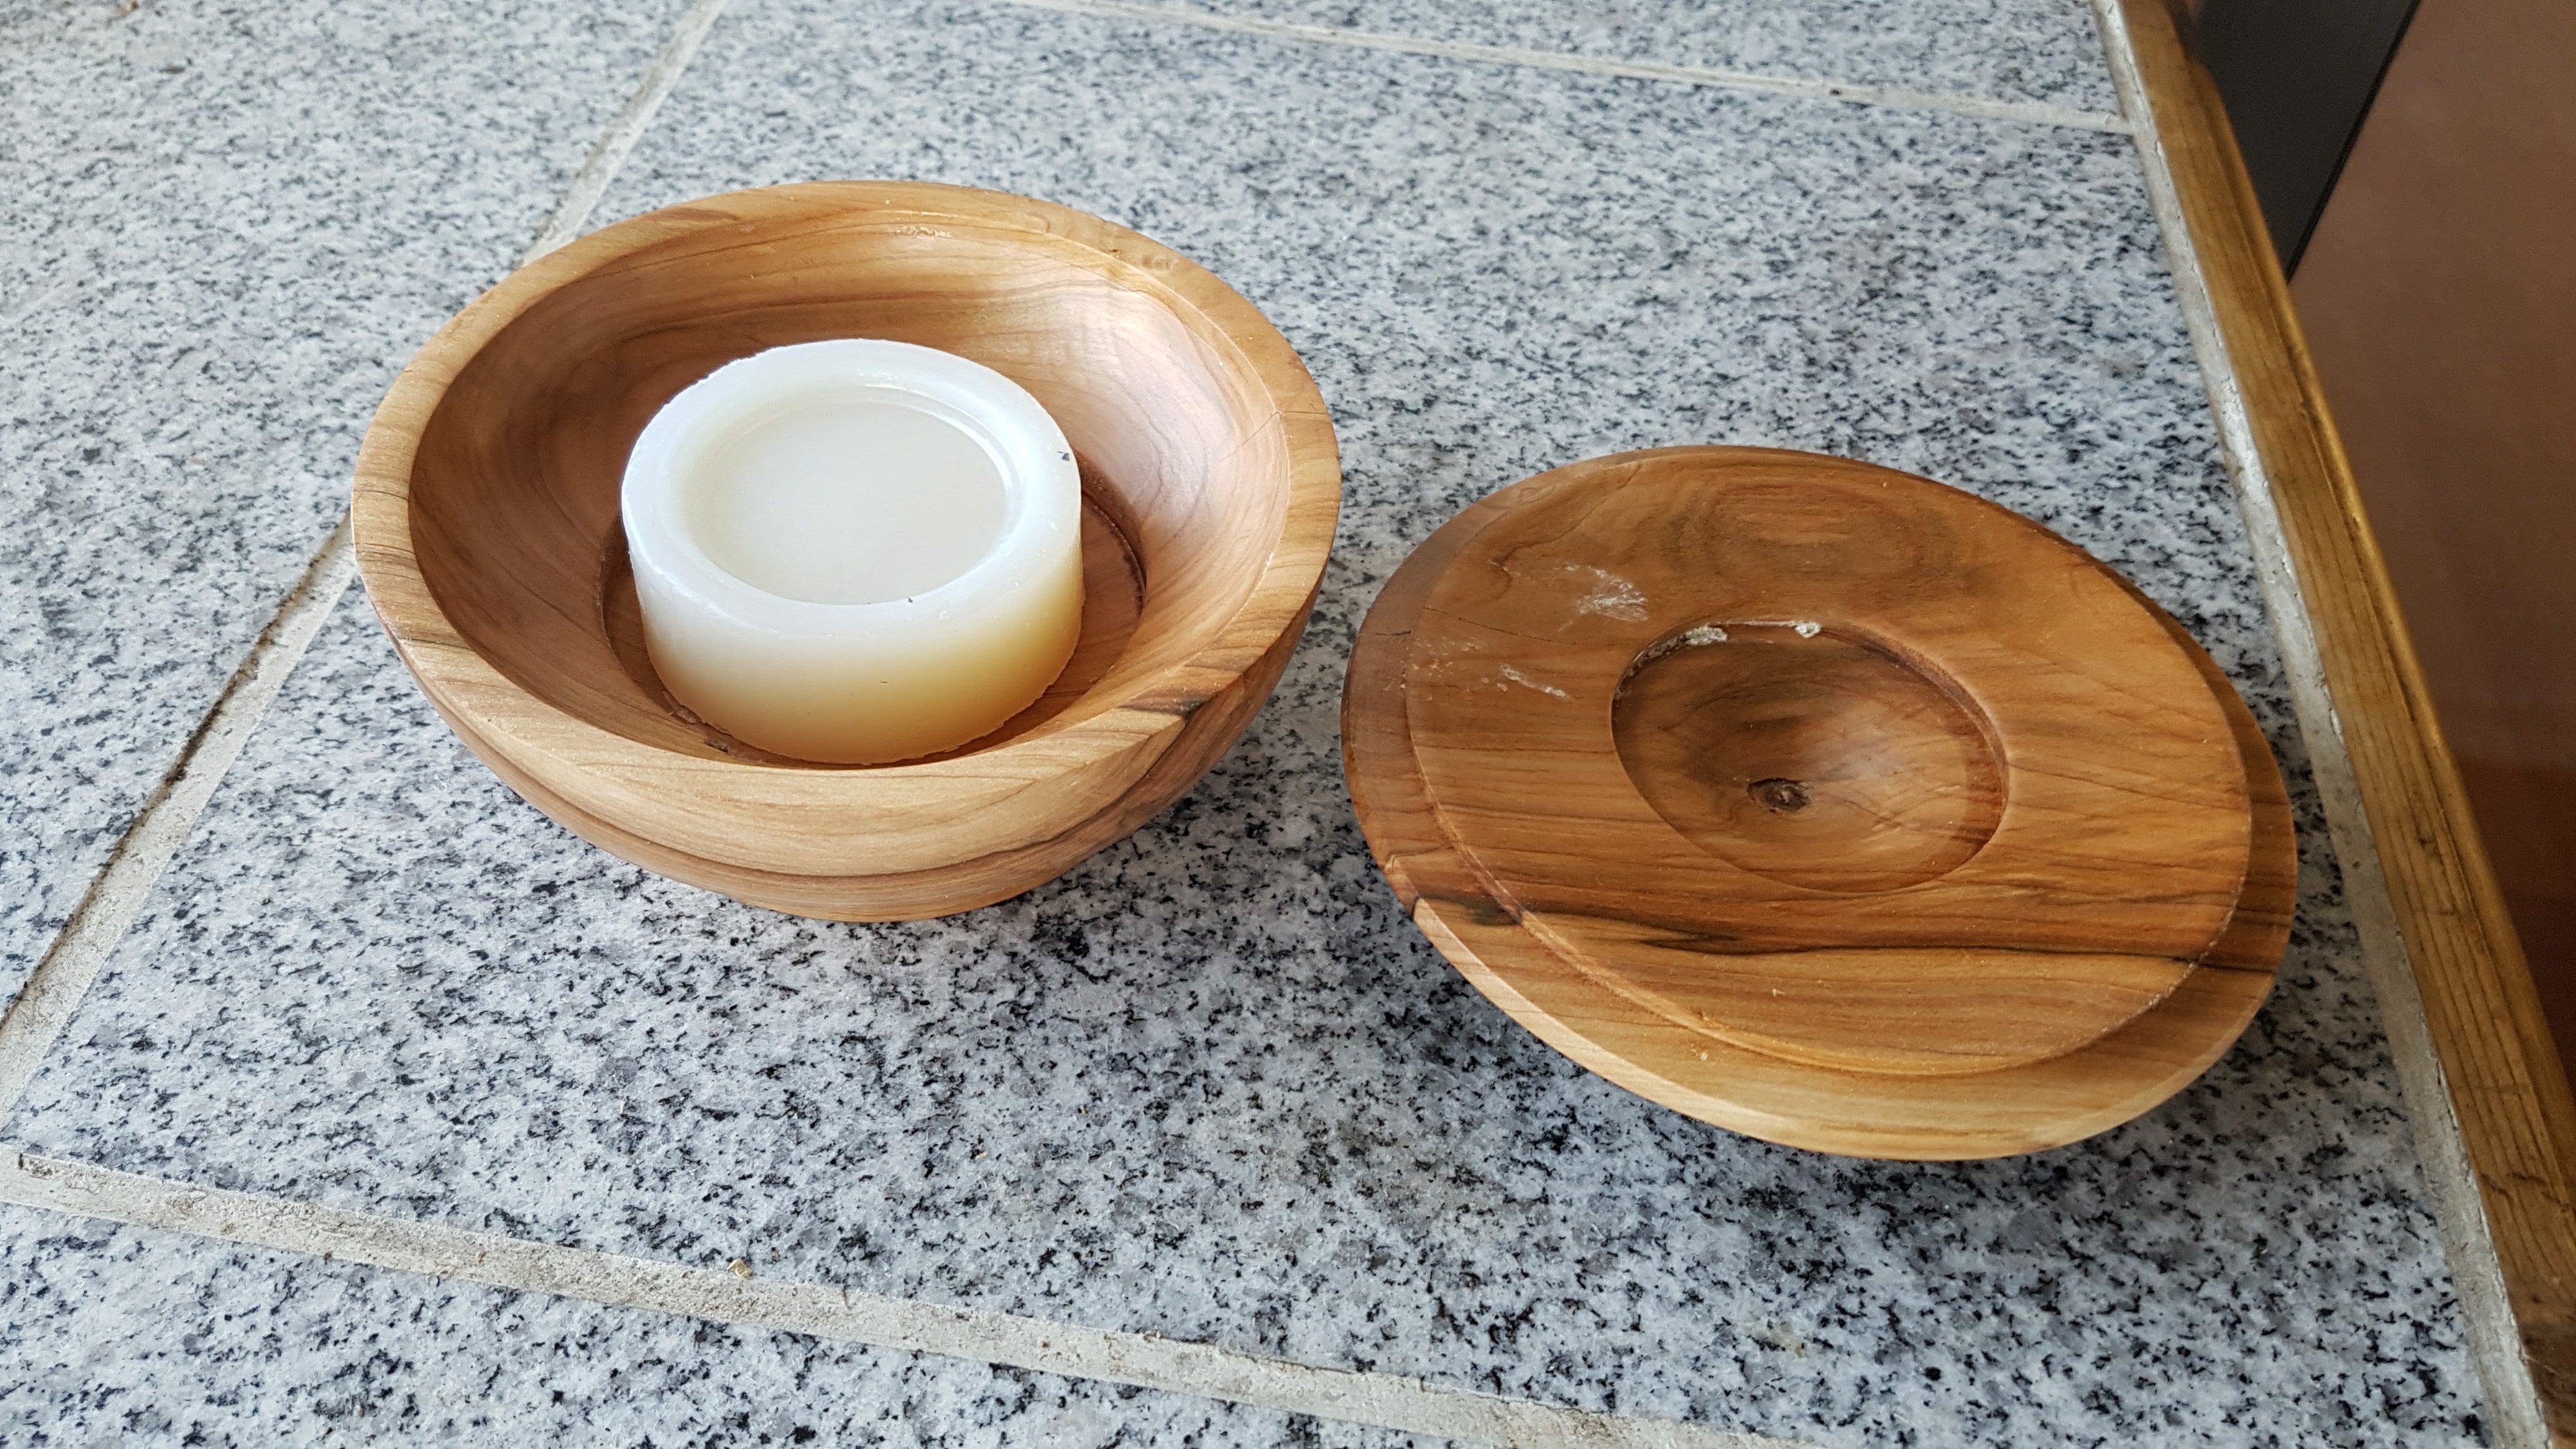 Mountain Ash Shaving bowl - with soap